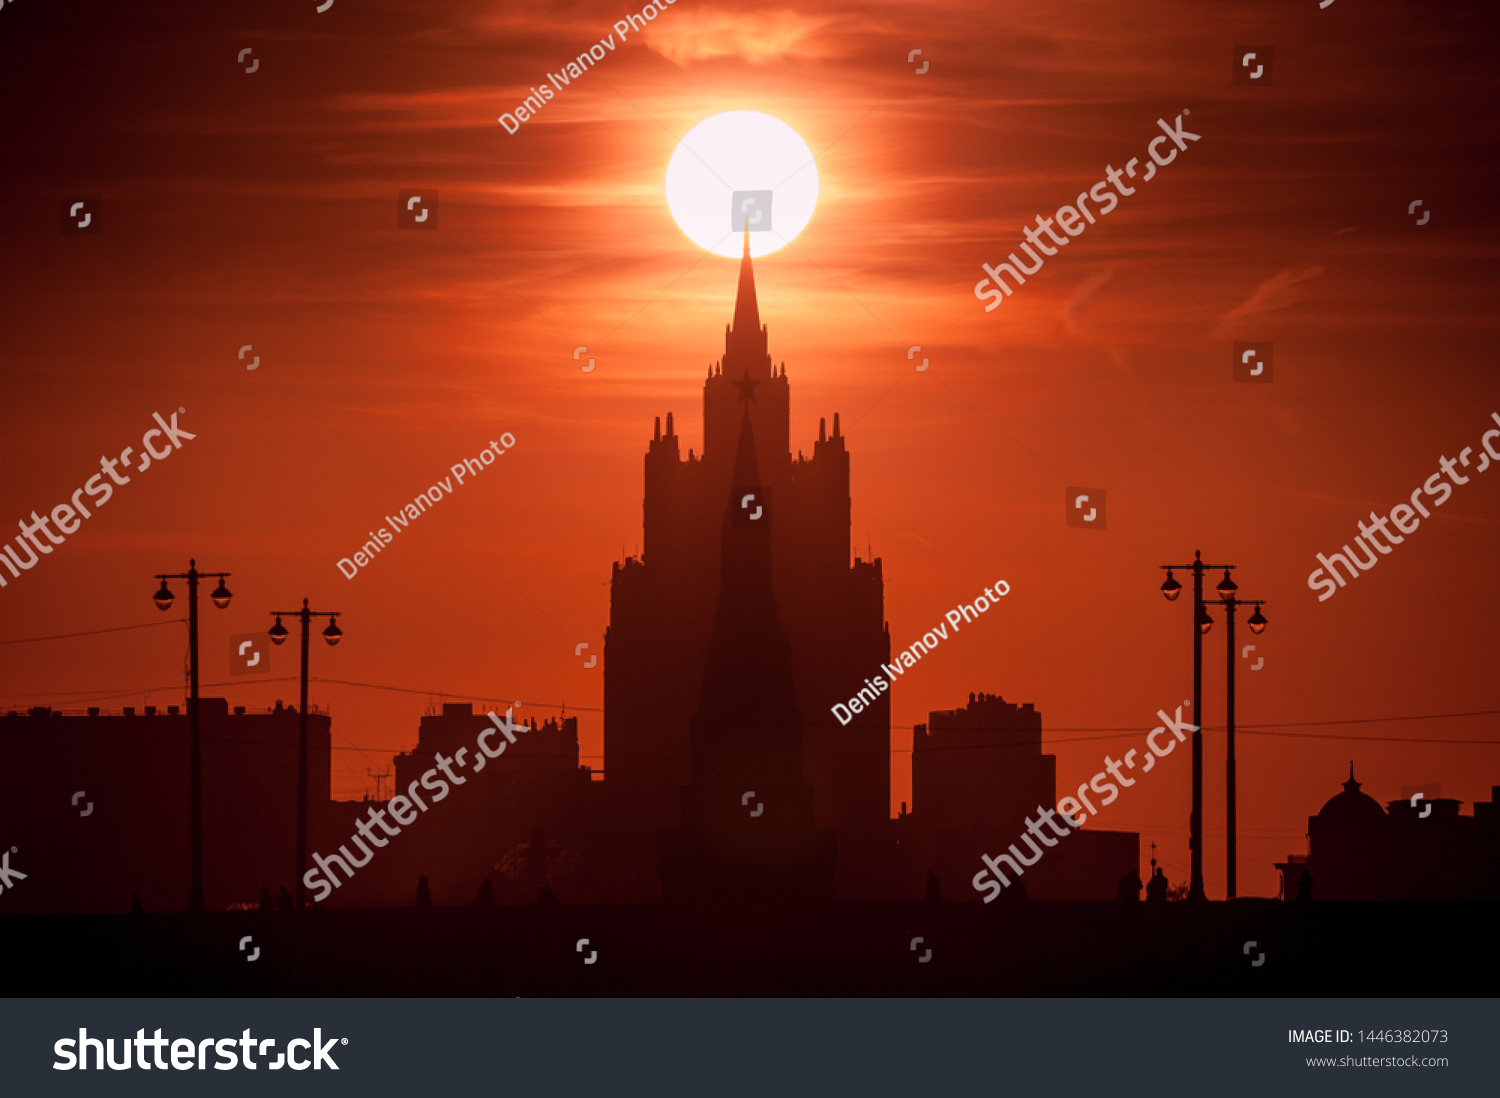 Sunset silhouettes of Kremlin and Ministry of Foreign Affairs of Russia in Moscow, Russia #1446382073